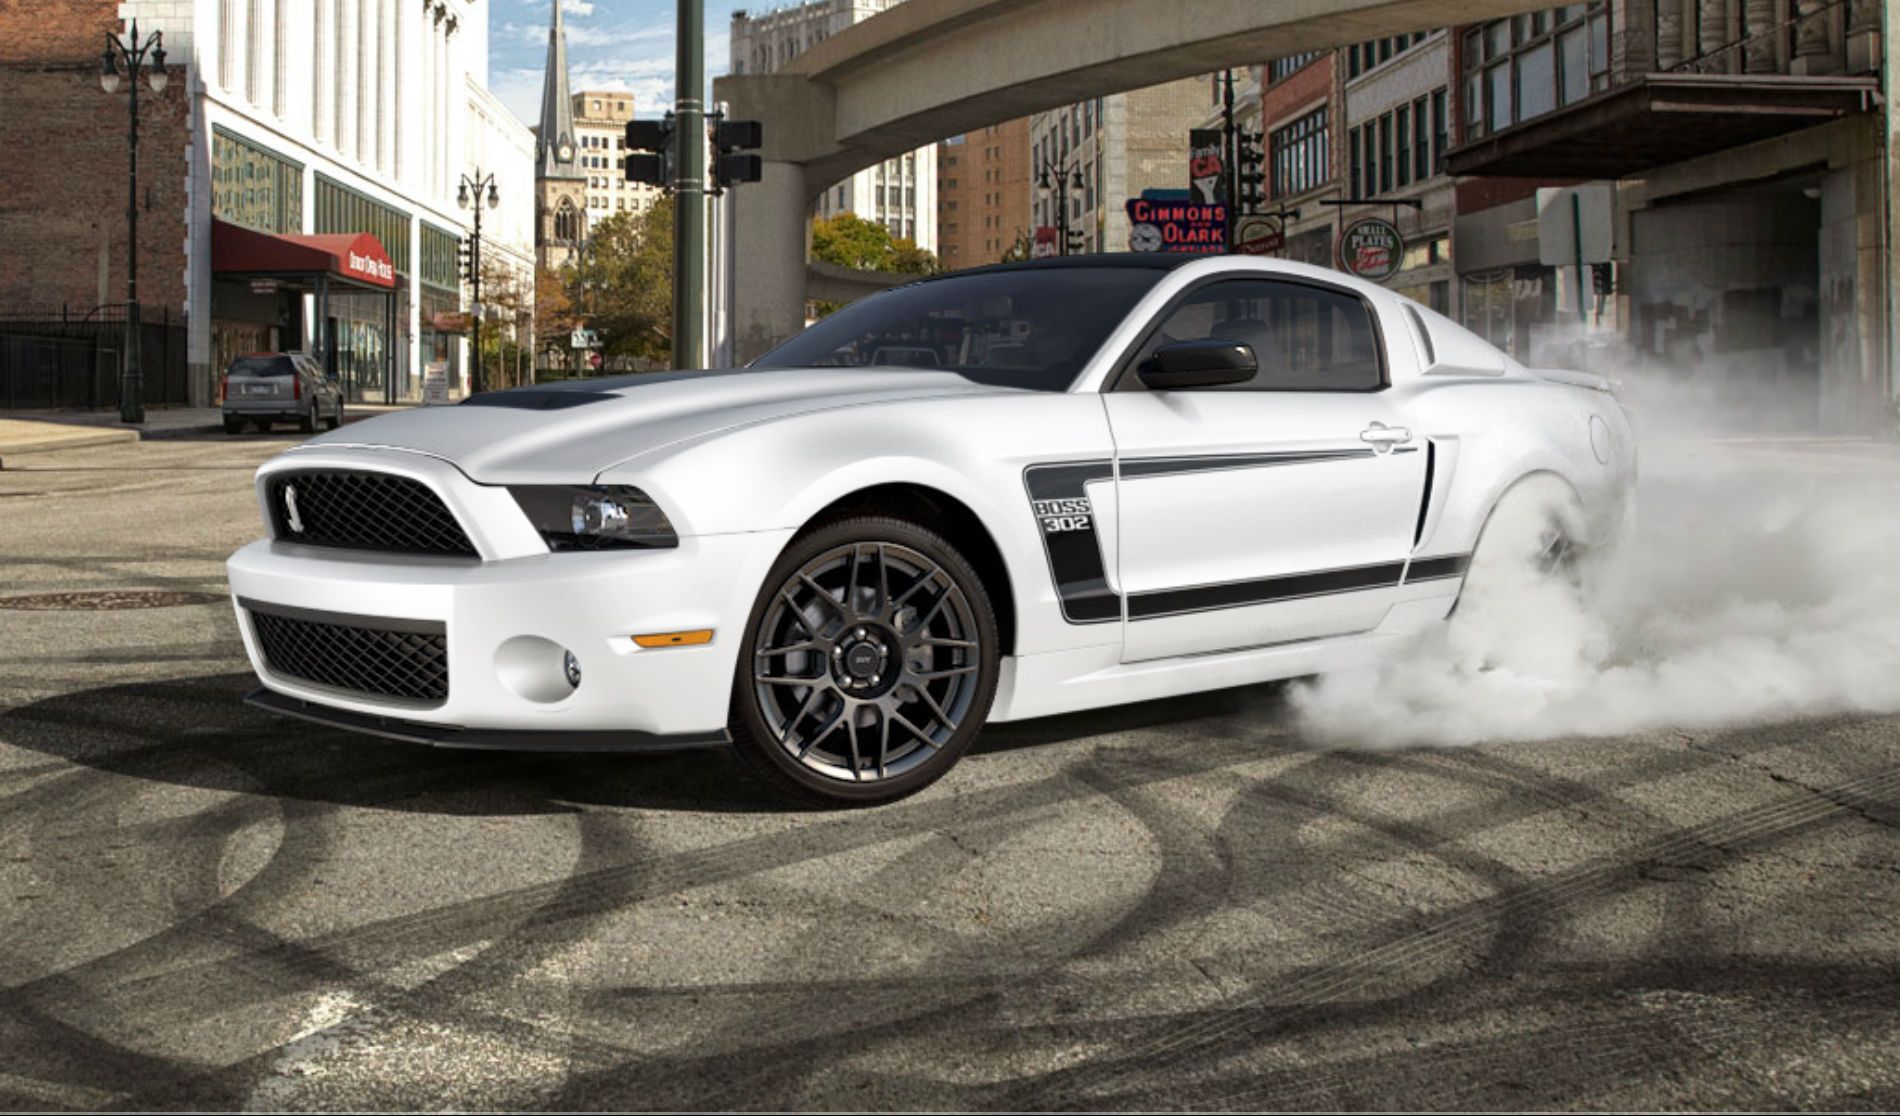 Mustang Burnout The Art Mad Wallpaper